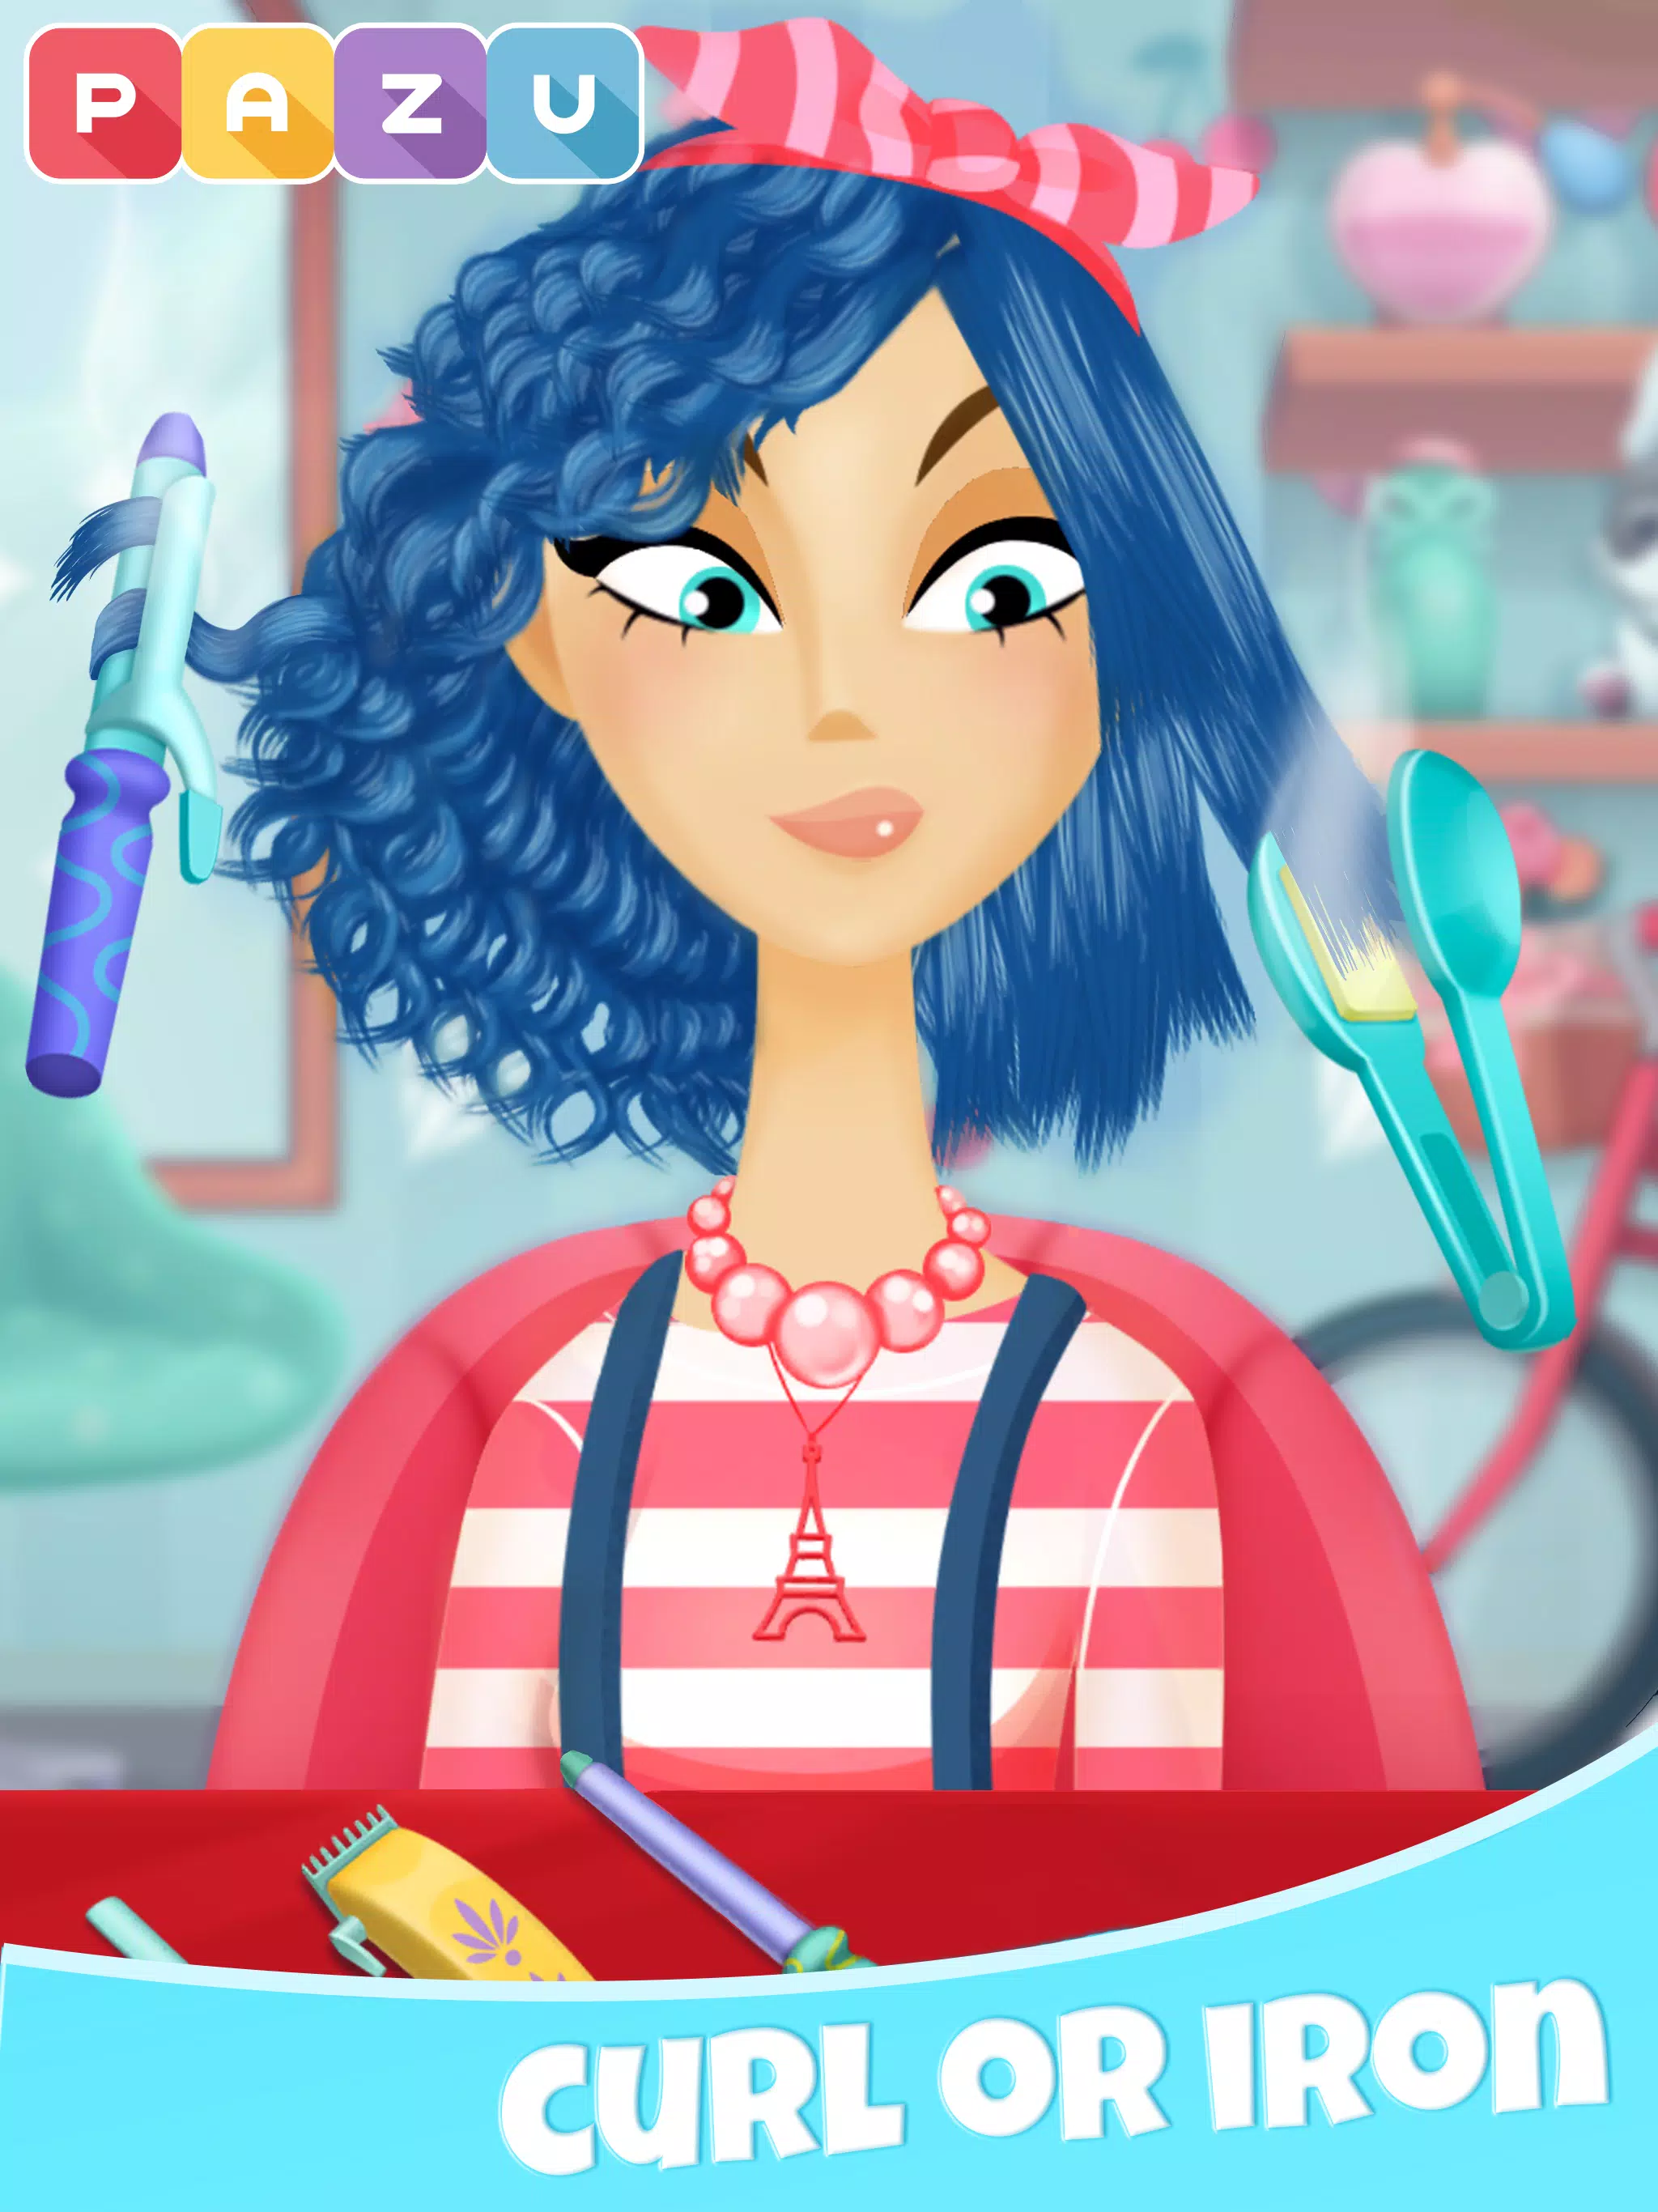 Pazu Girls hair salon 2 for Android - APK Download